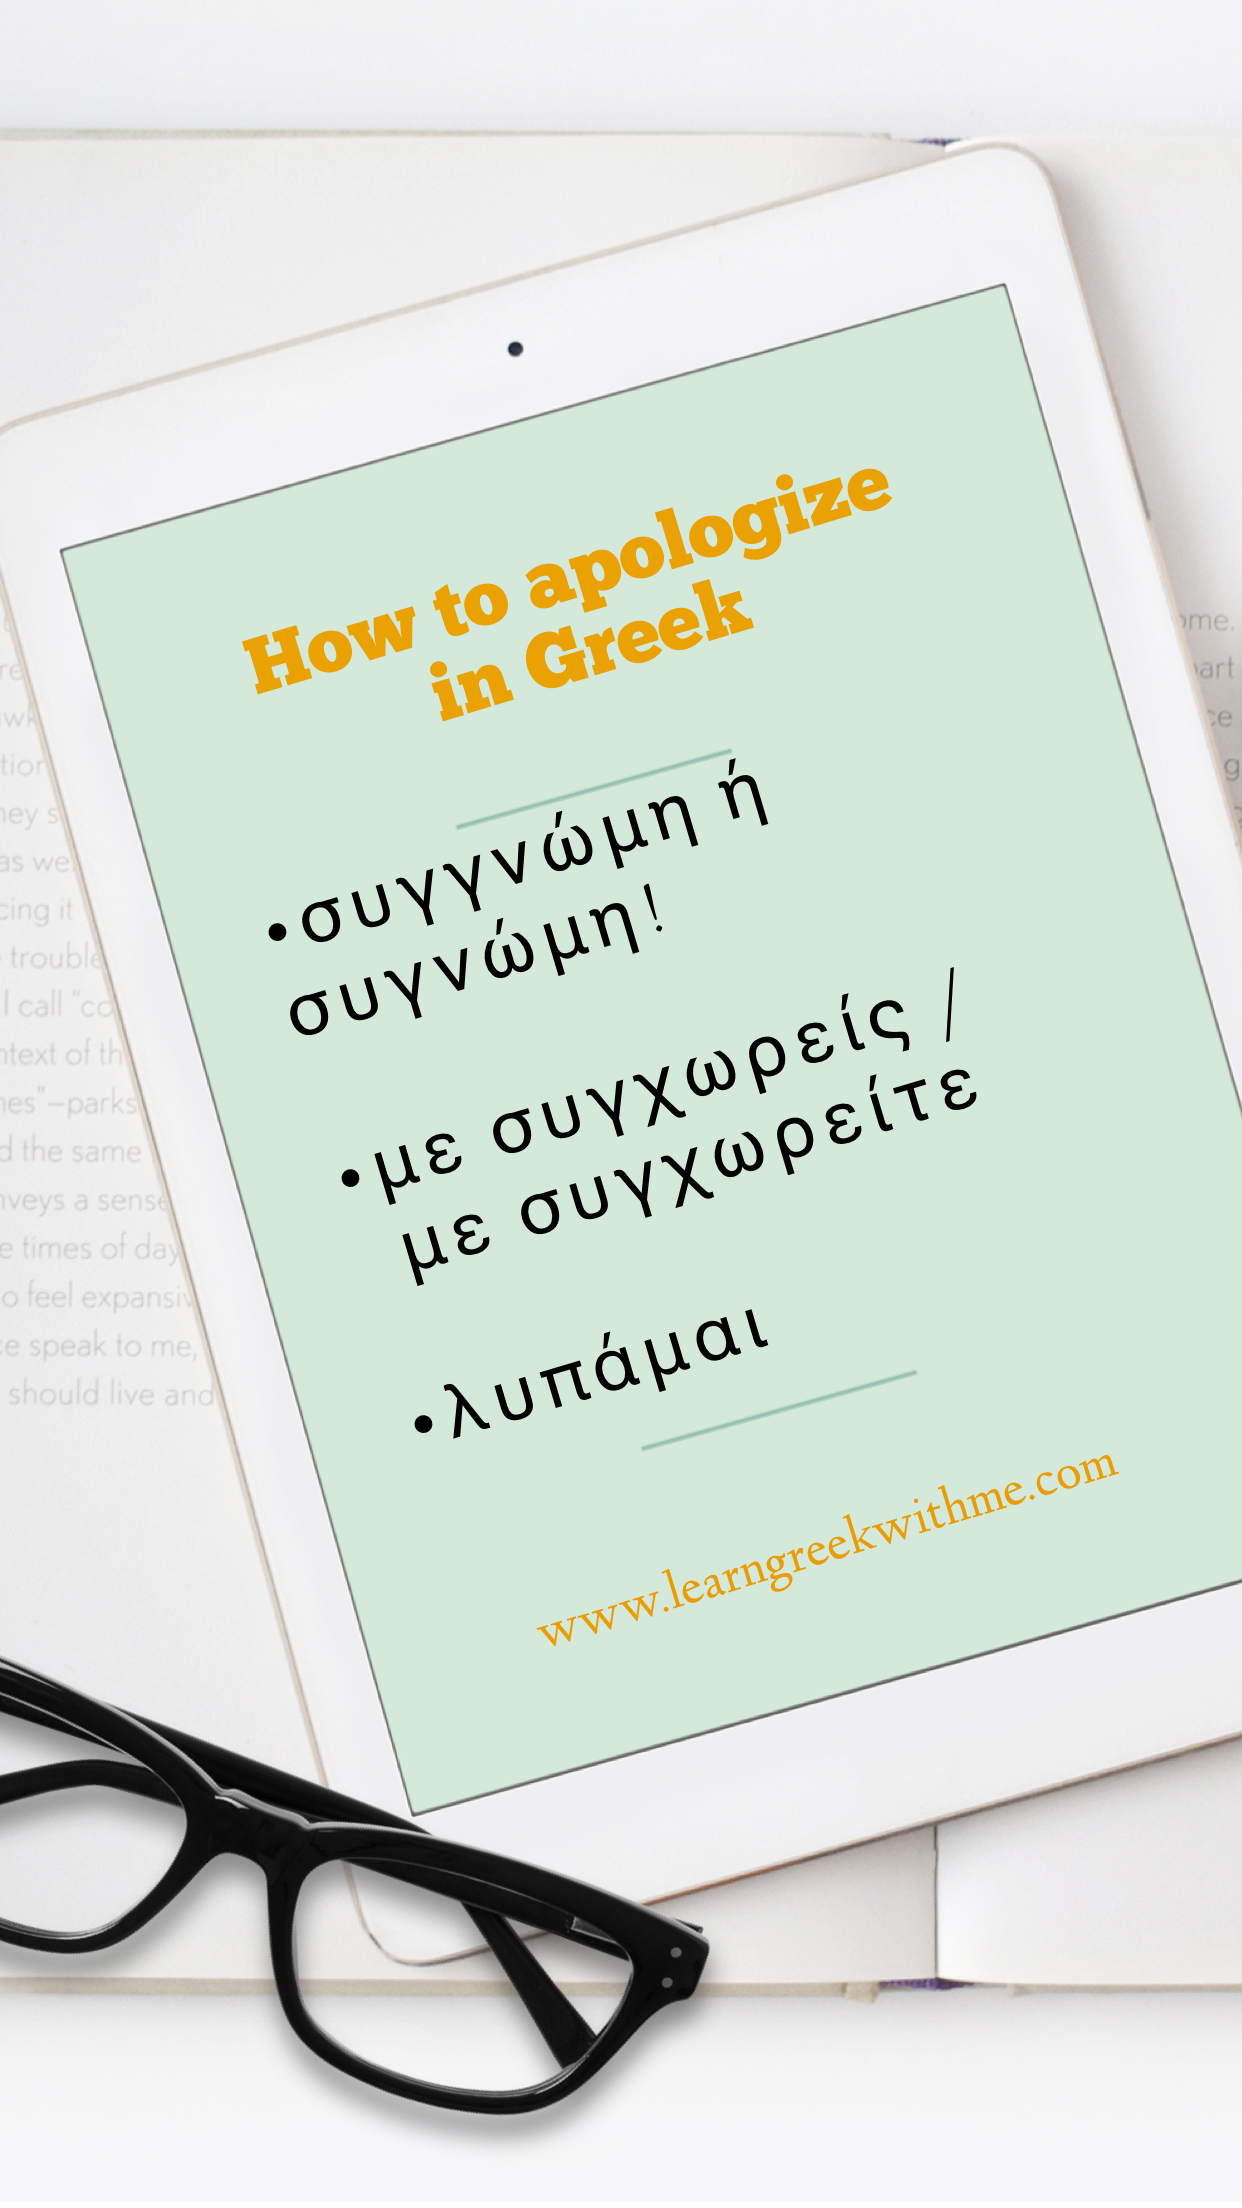 How to apologize in Greek